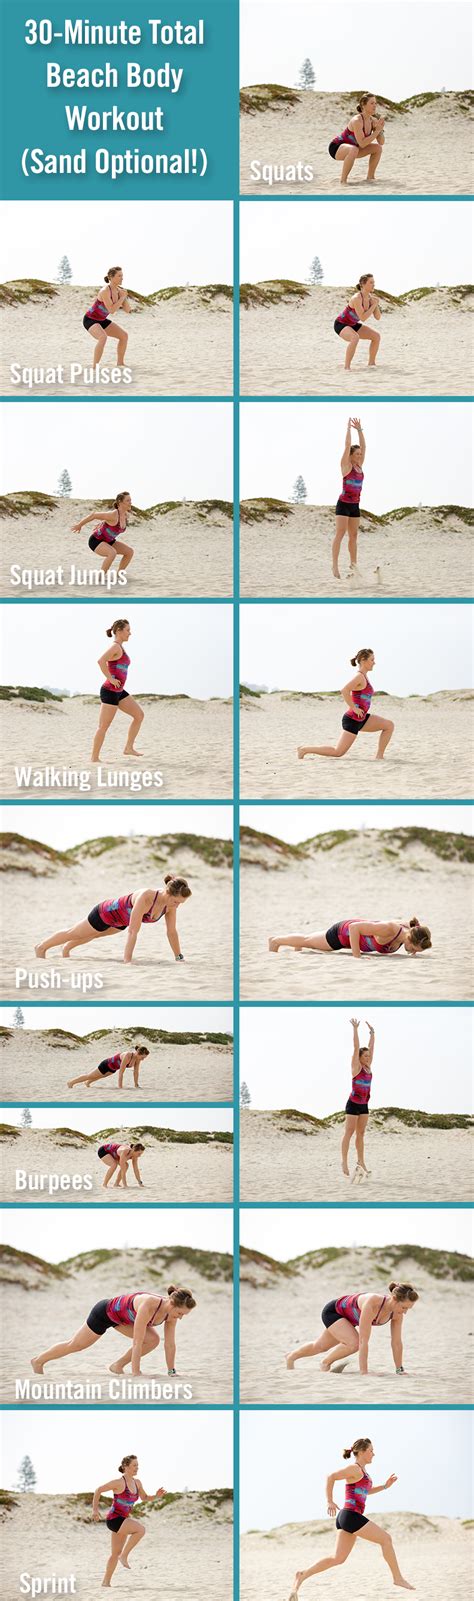 30 Minute Total Beach Body Workout Sand Optional